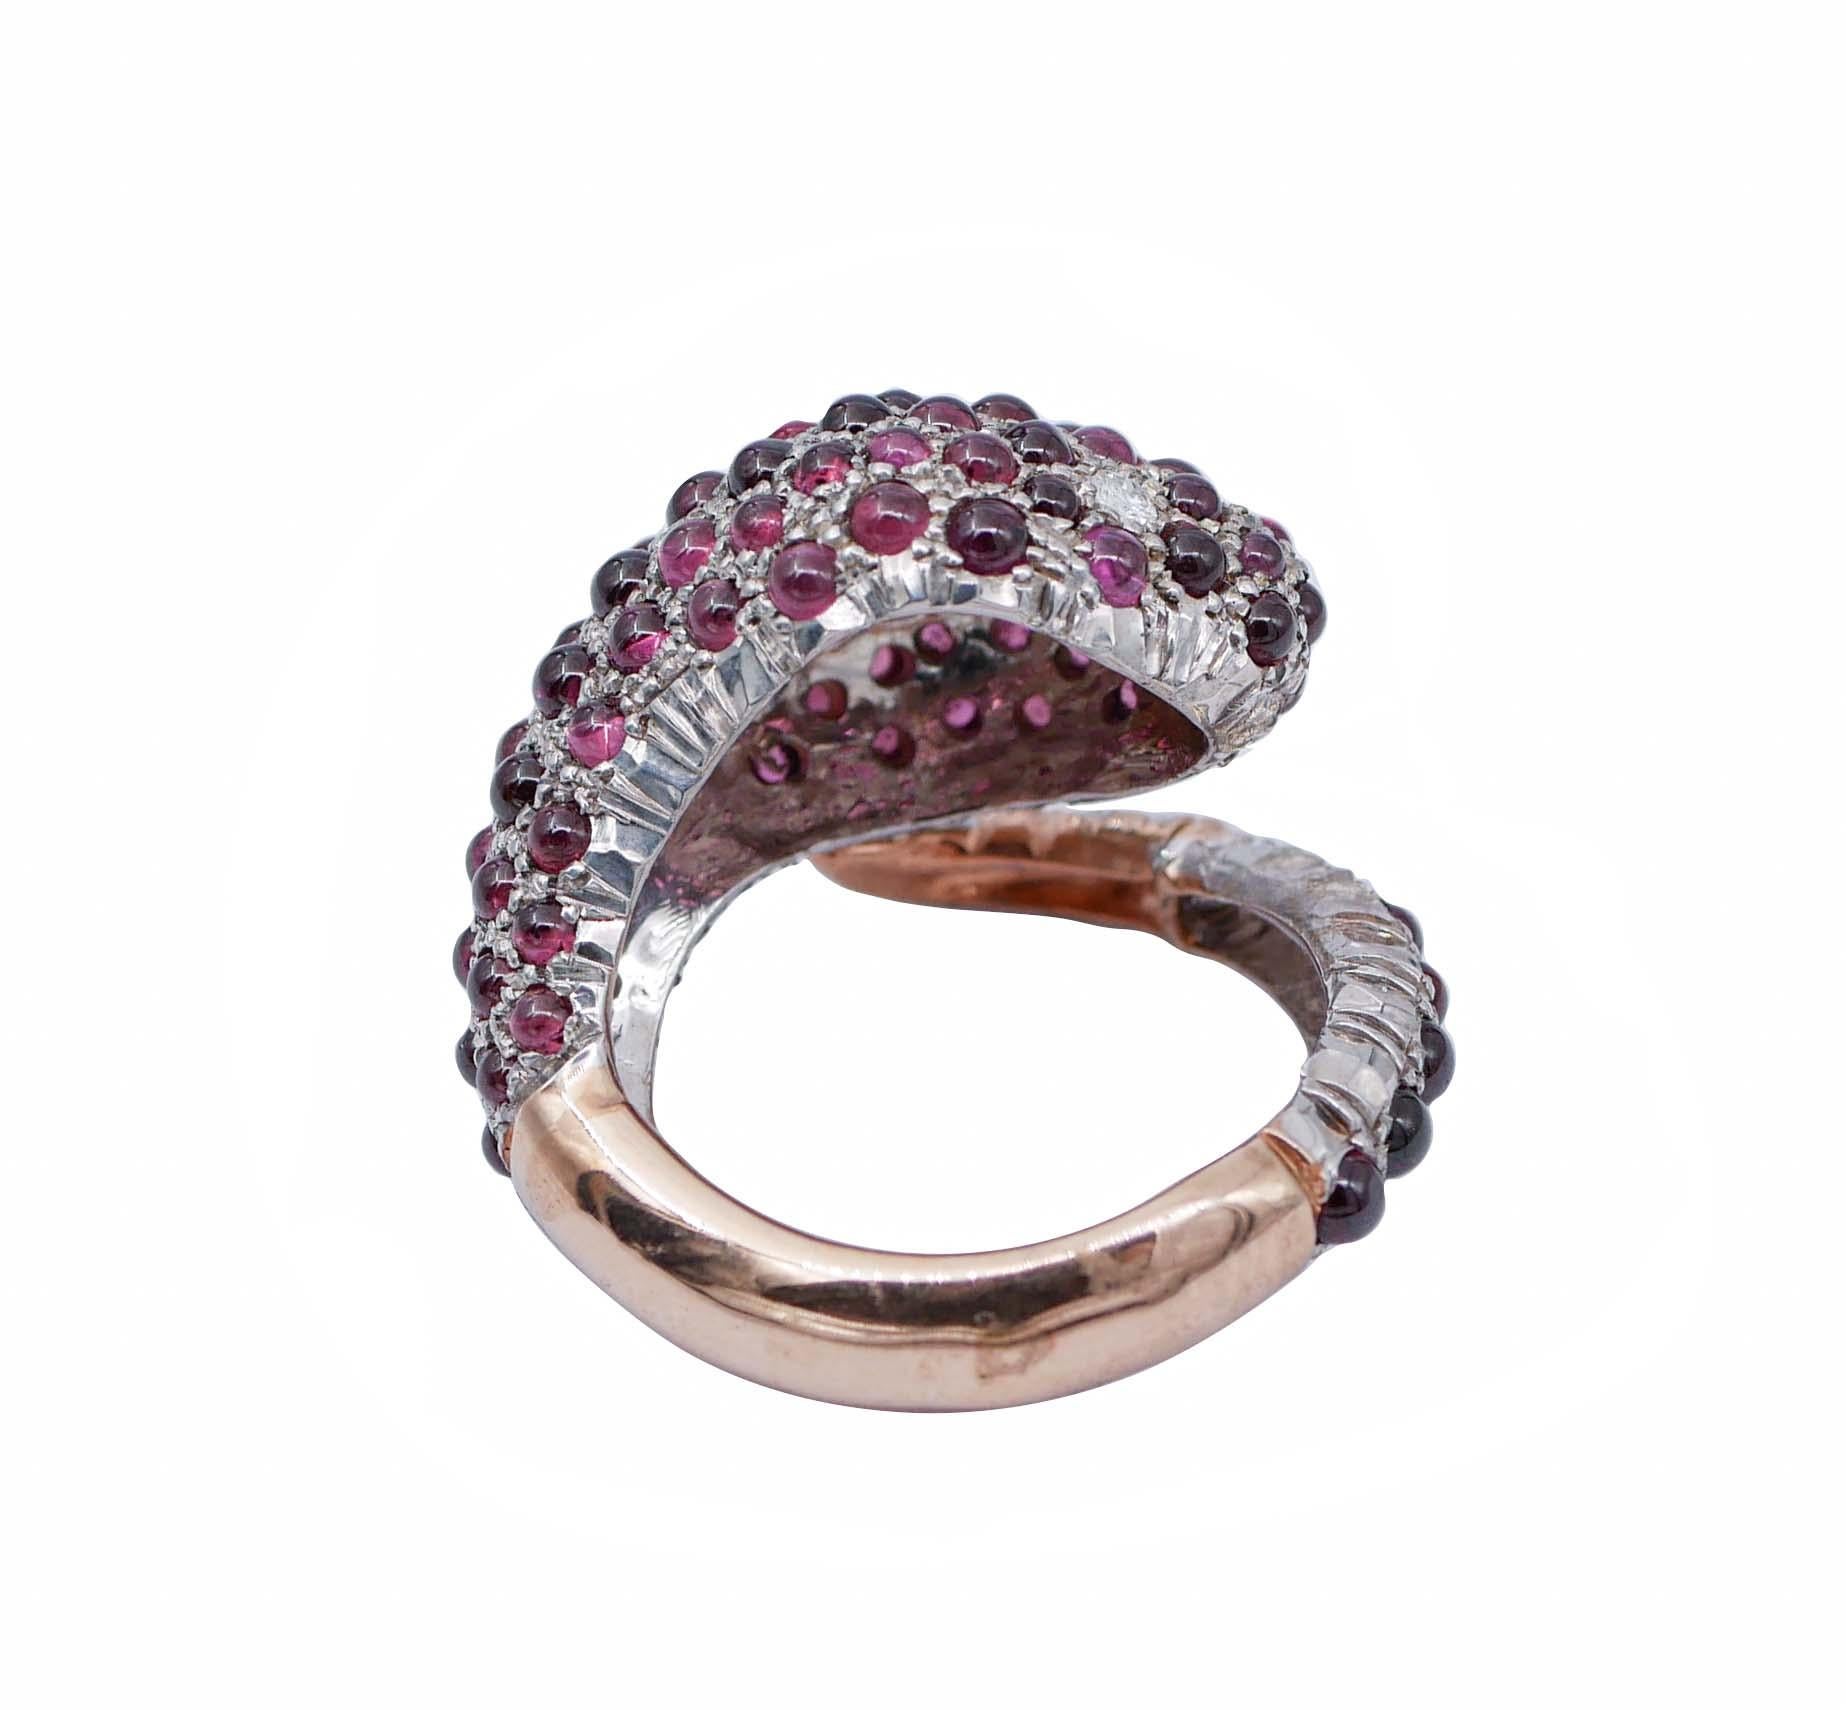 Mixed Cut Diamonds, Garnets, Rose Gold and Silver Gold Snake Ring For Sale